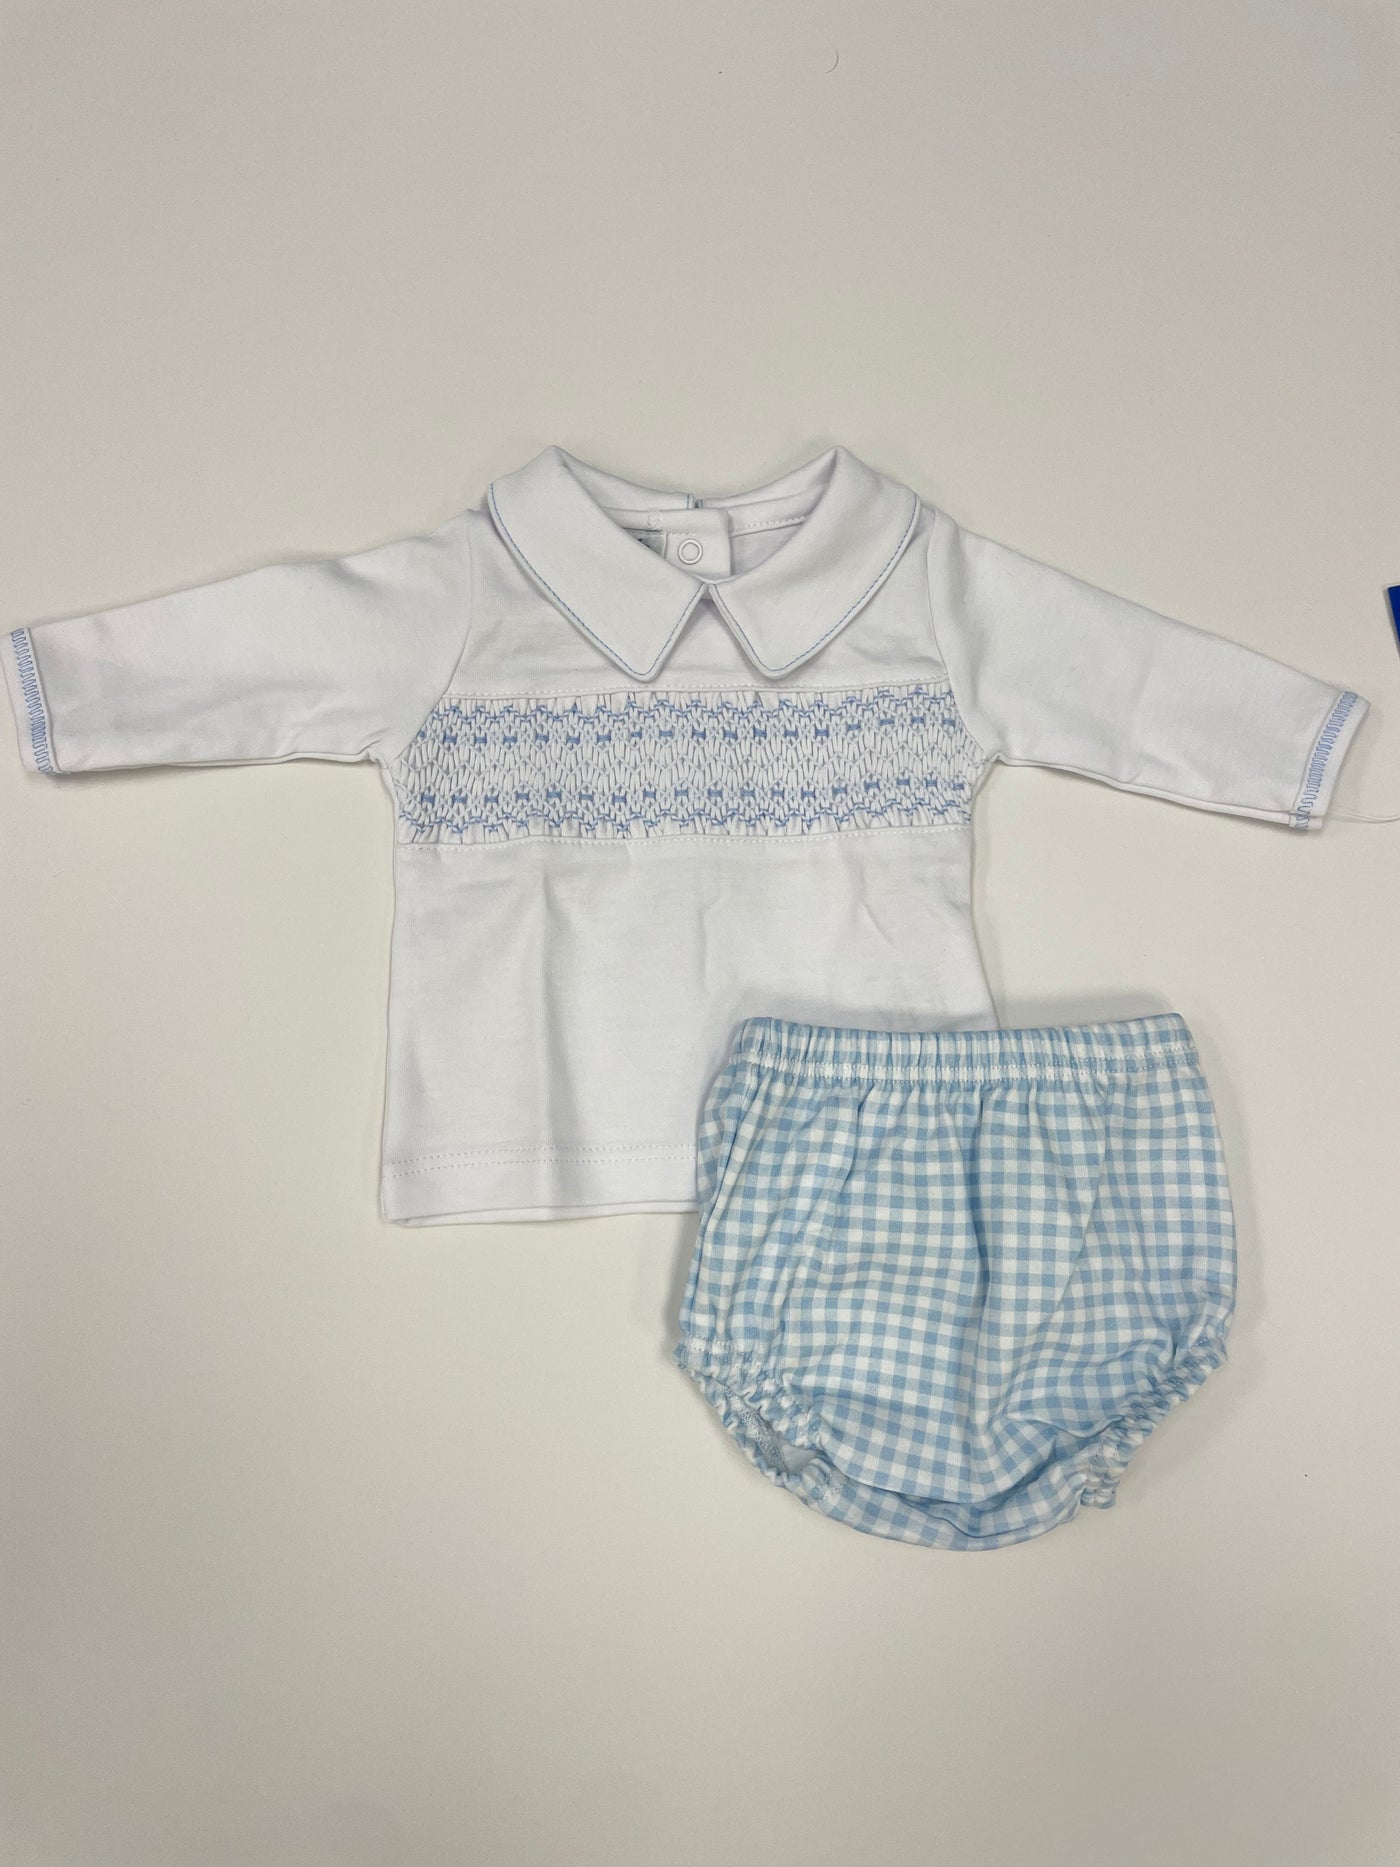 Emma and Aedan Smocked Collared Diaper Cover Set - light blue